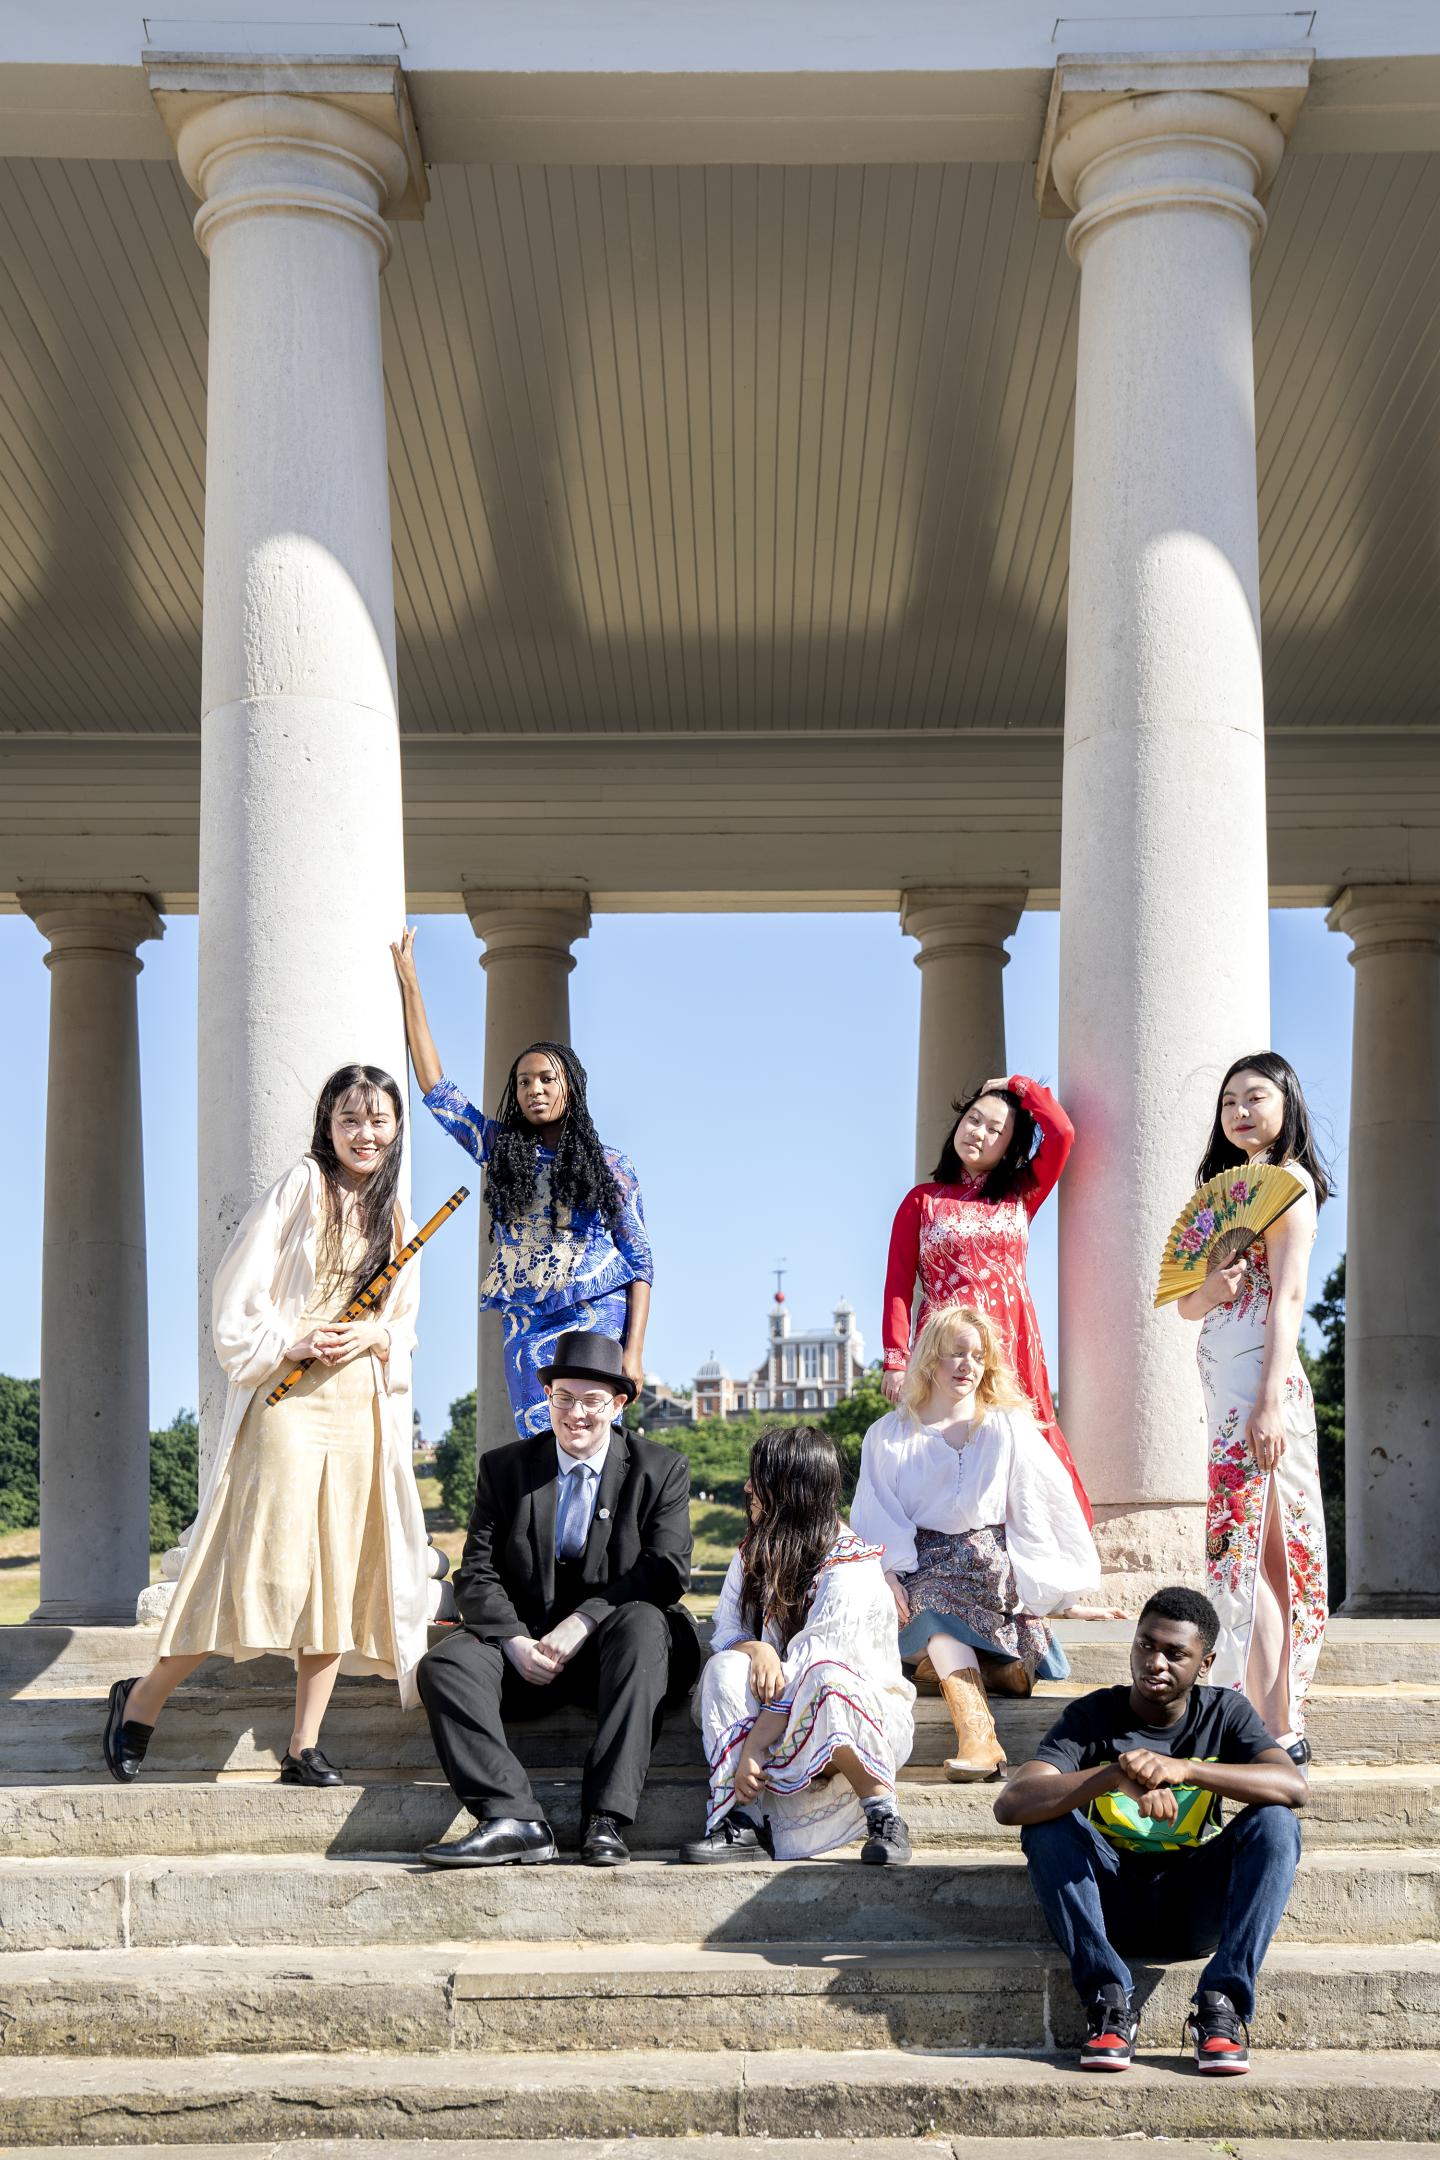 The youth collective pose on the colonnades with the Observatory behind them.